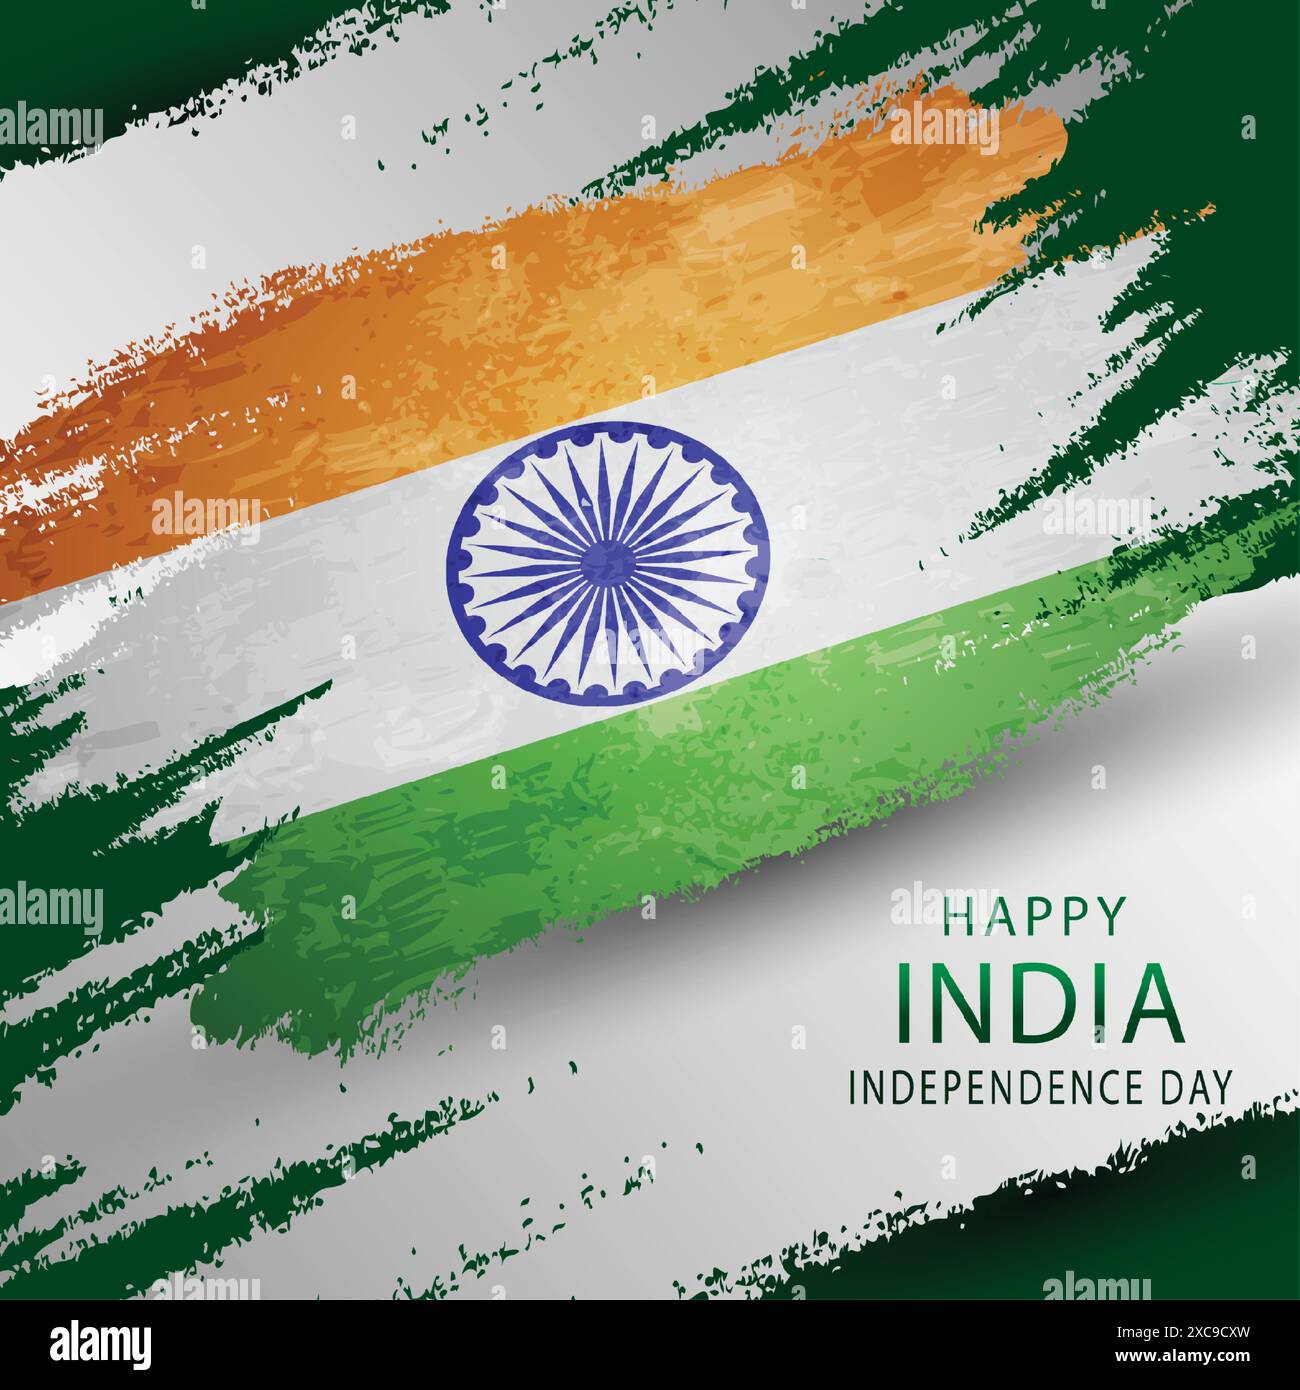 15 August India Independence Day Stock Vector